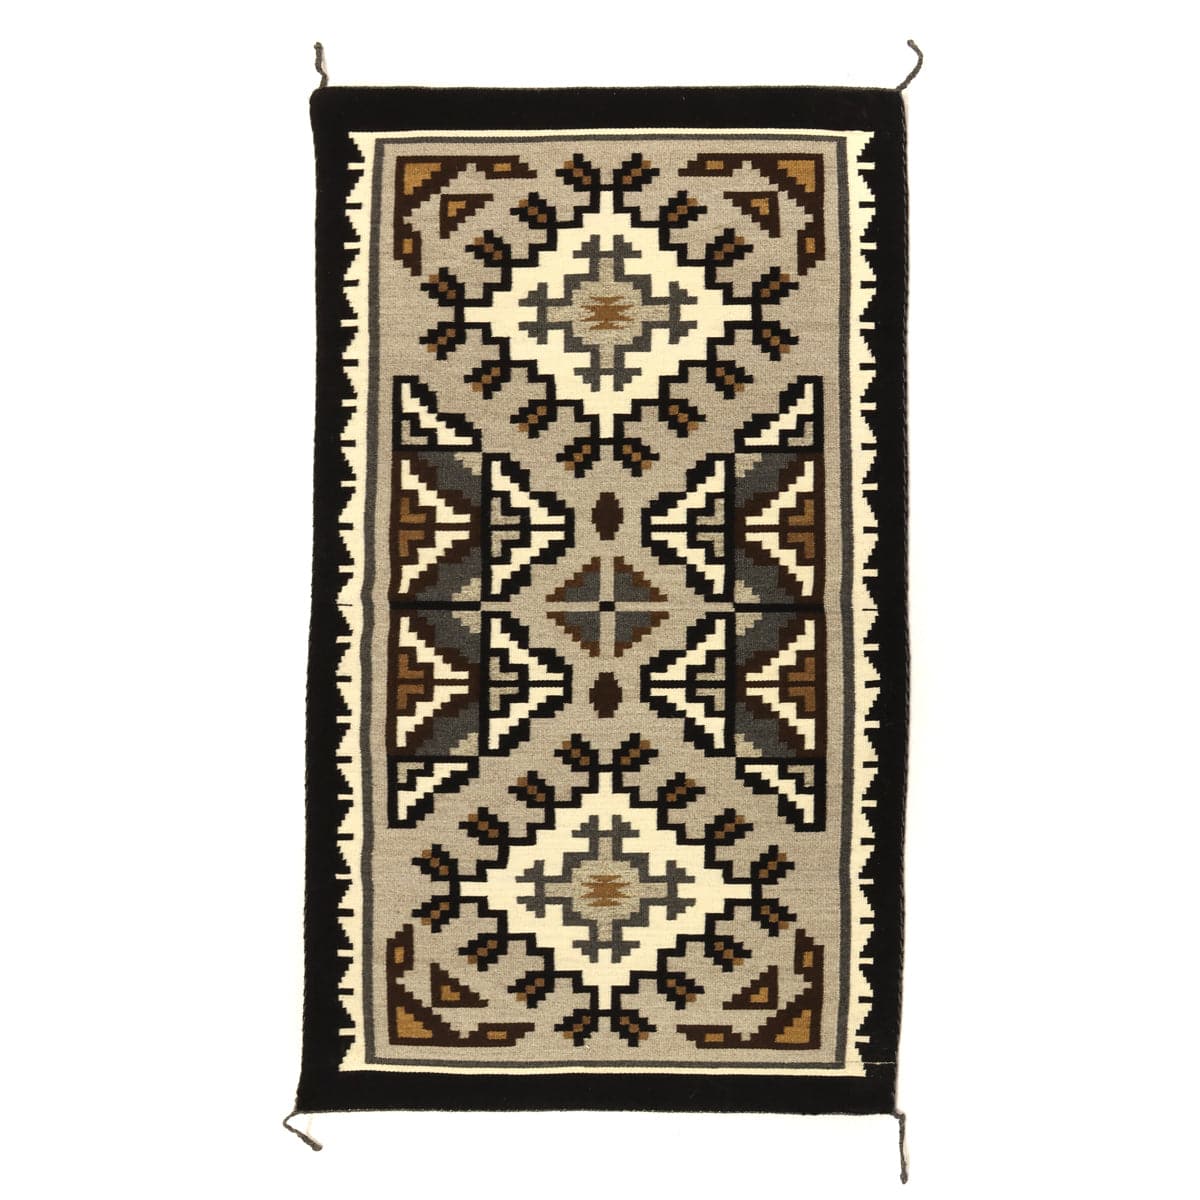 Lorraine Taylor - Navajo Two Grey Hills Rug, Contemporary, 47" x 28" DONATION WILL BE MADE TO BLESSINGWAY (T92308-0314-015) 5